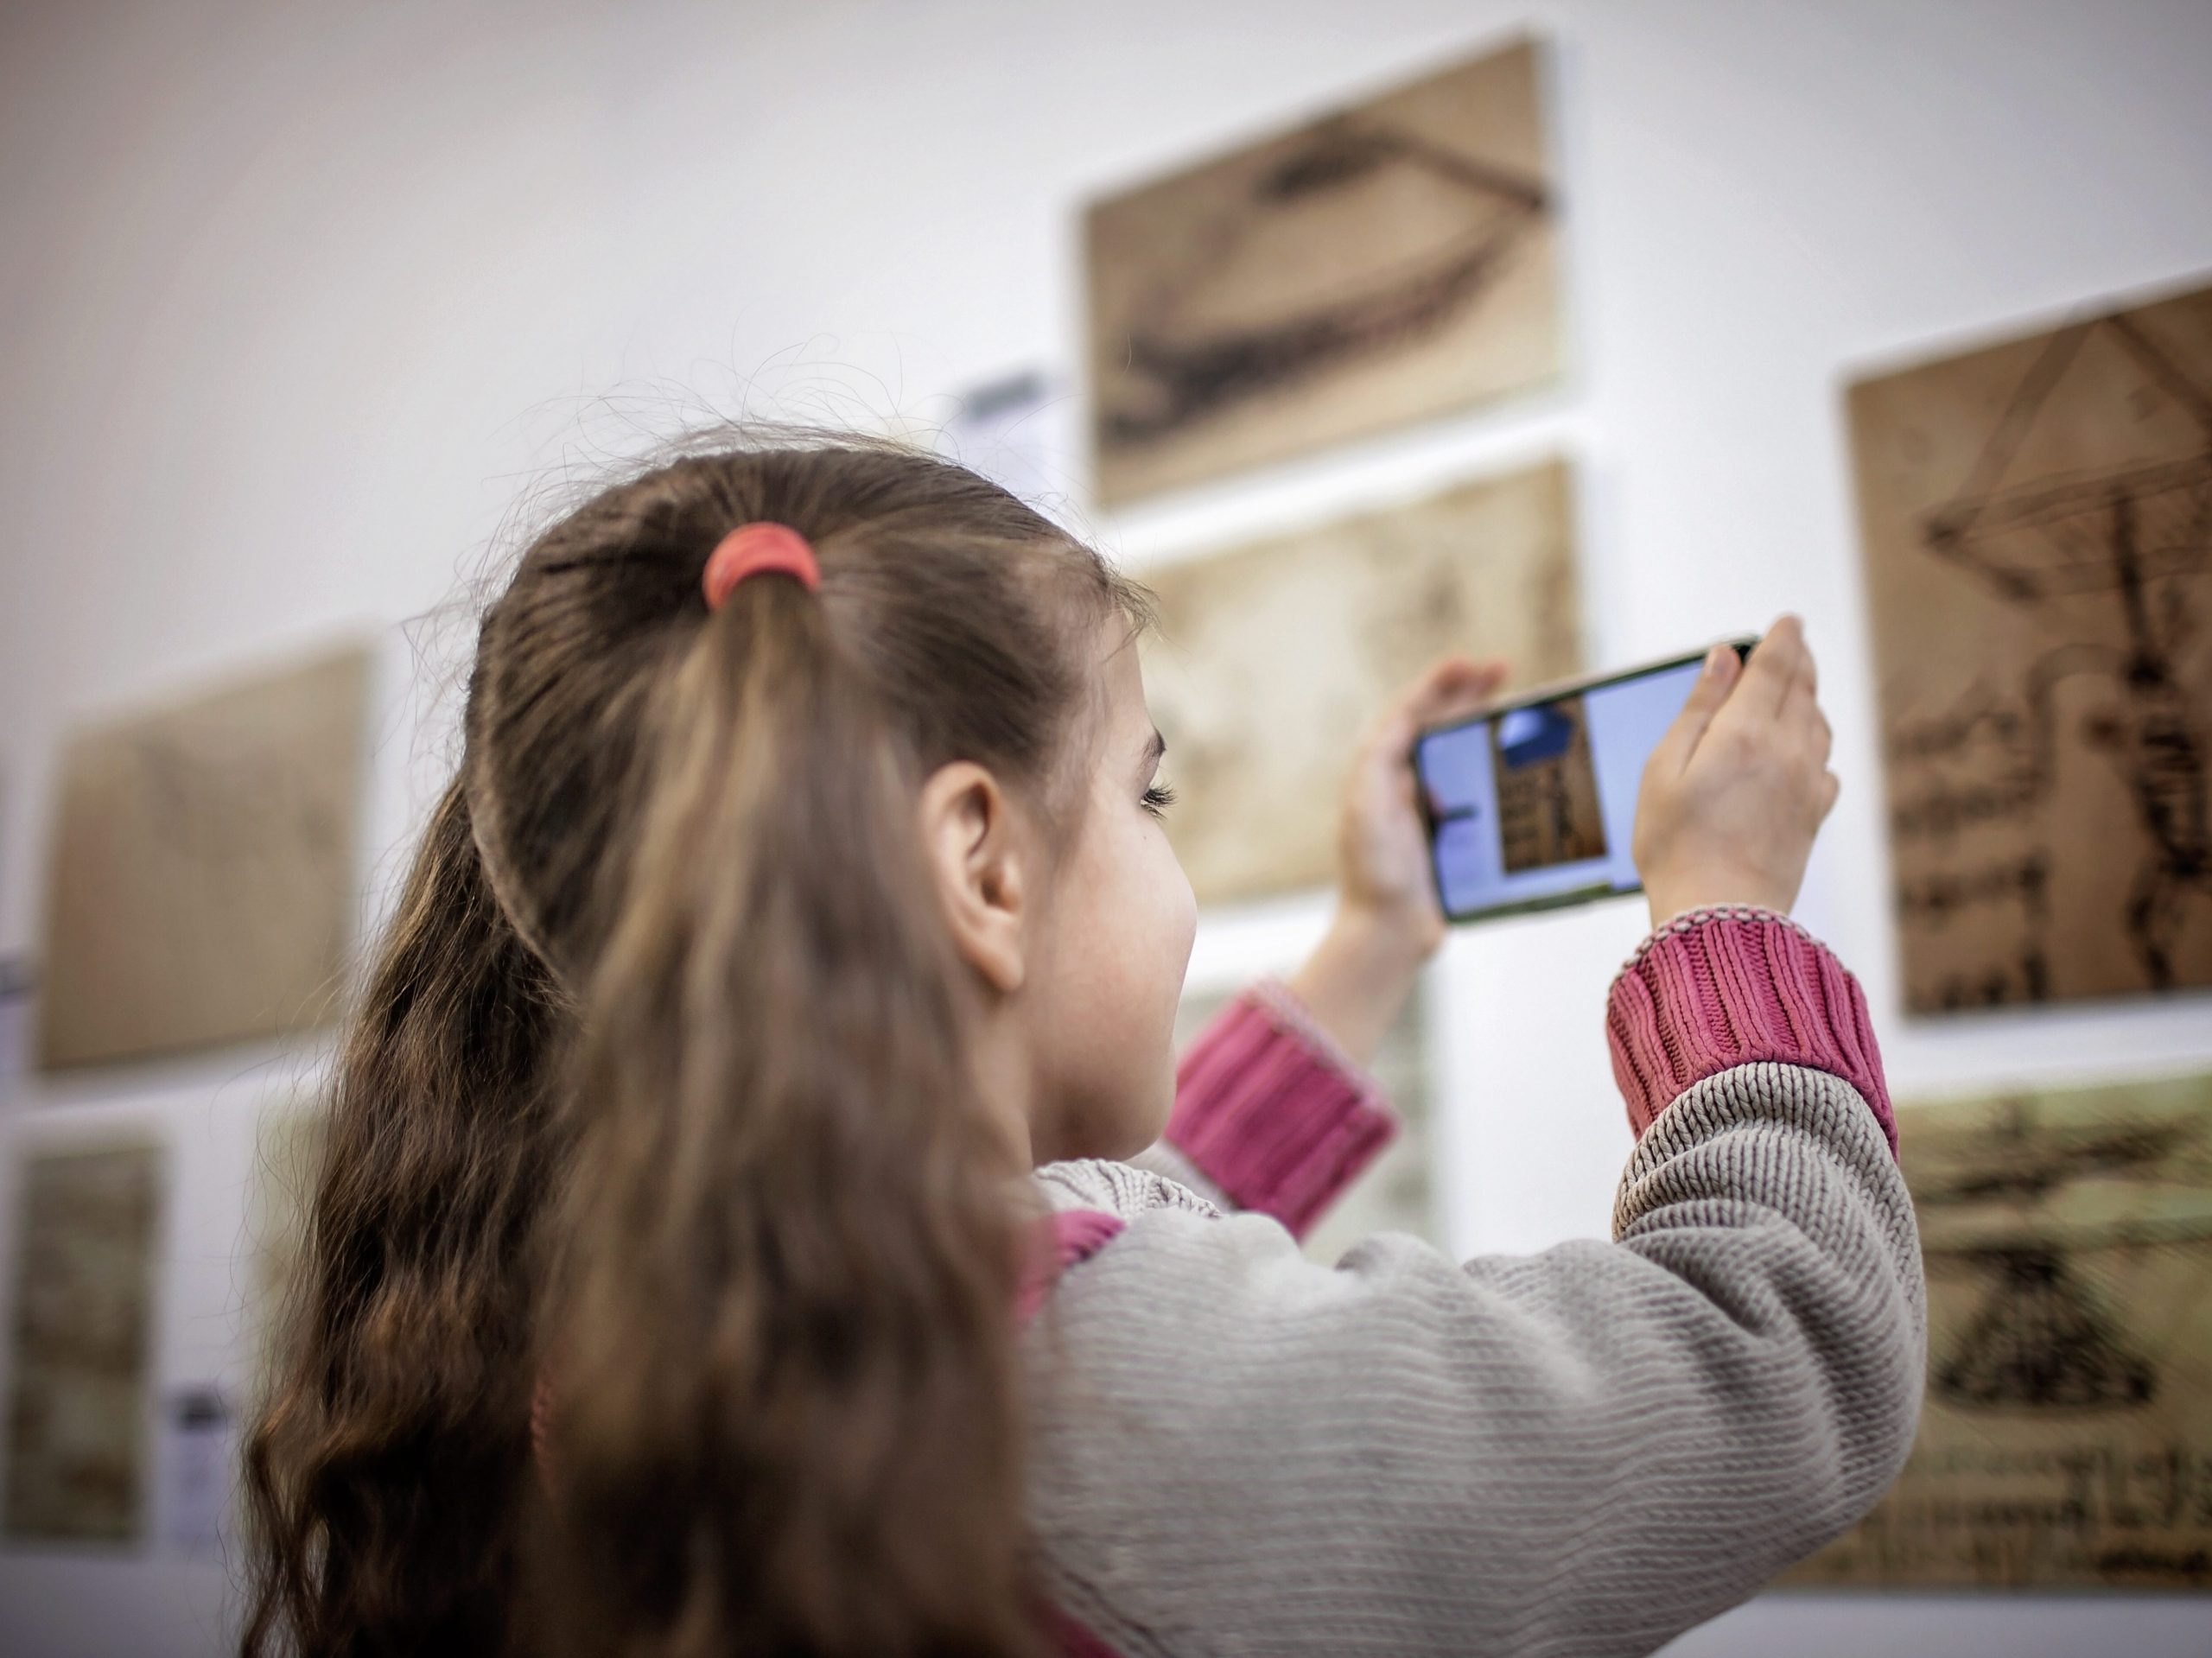 girl using phone in a healthy way to take a photo at a museum